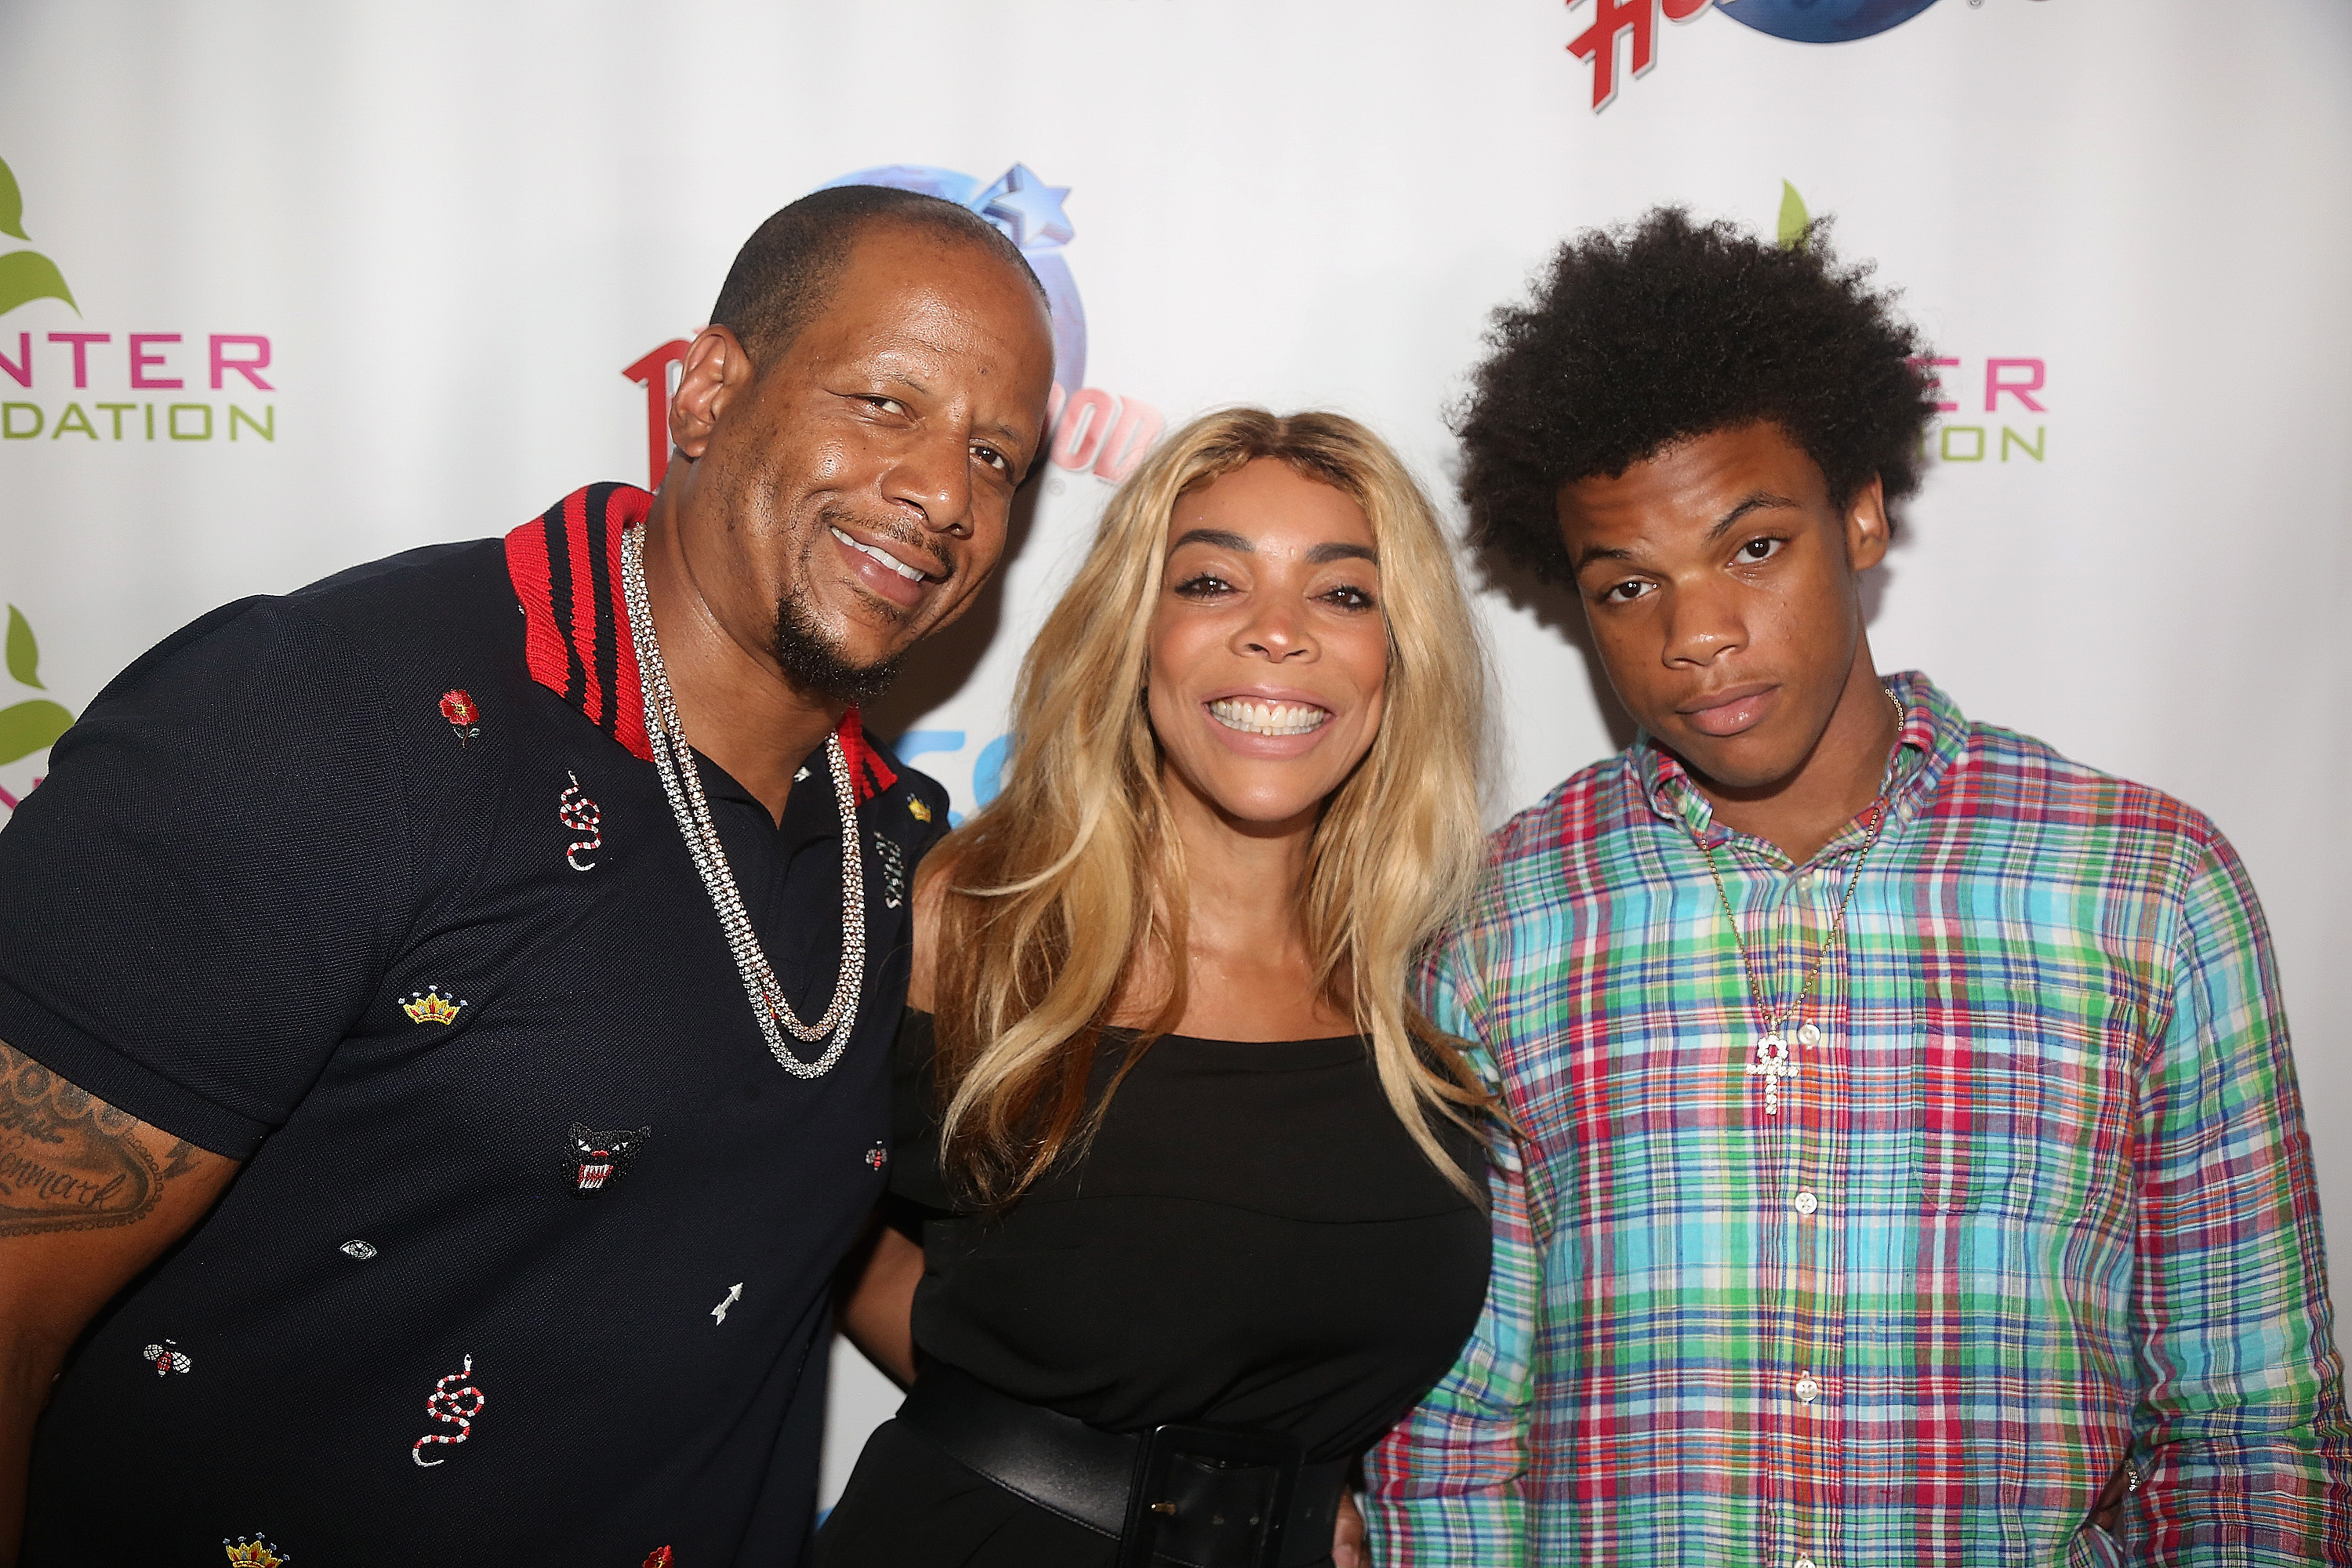 Kevin Hunter, Wendy Williams, and Kevin Hunter Jr. at a celebration for The Hunter Foundation Charity  on July 11, 2017 in New York City | Source: Getty Images